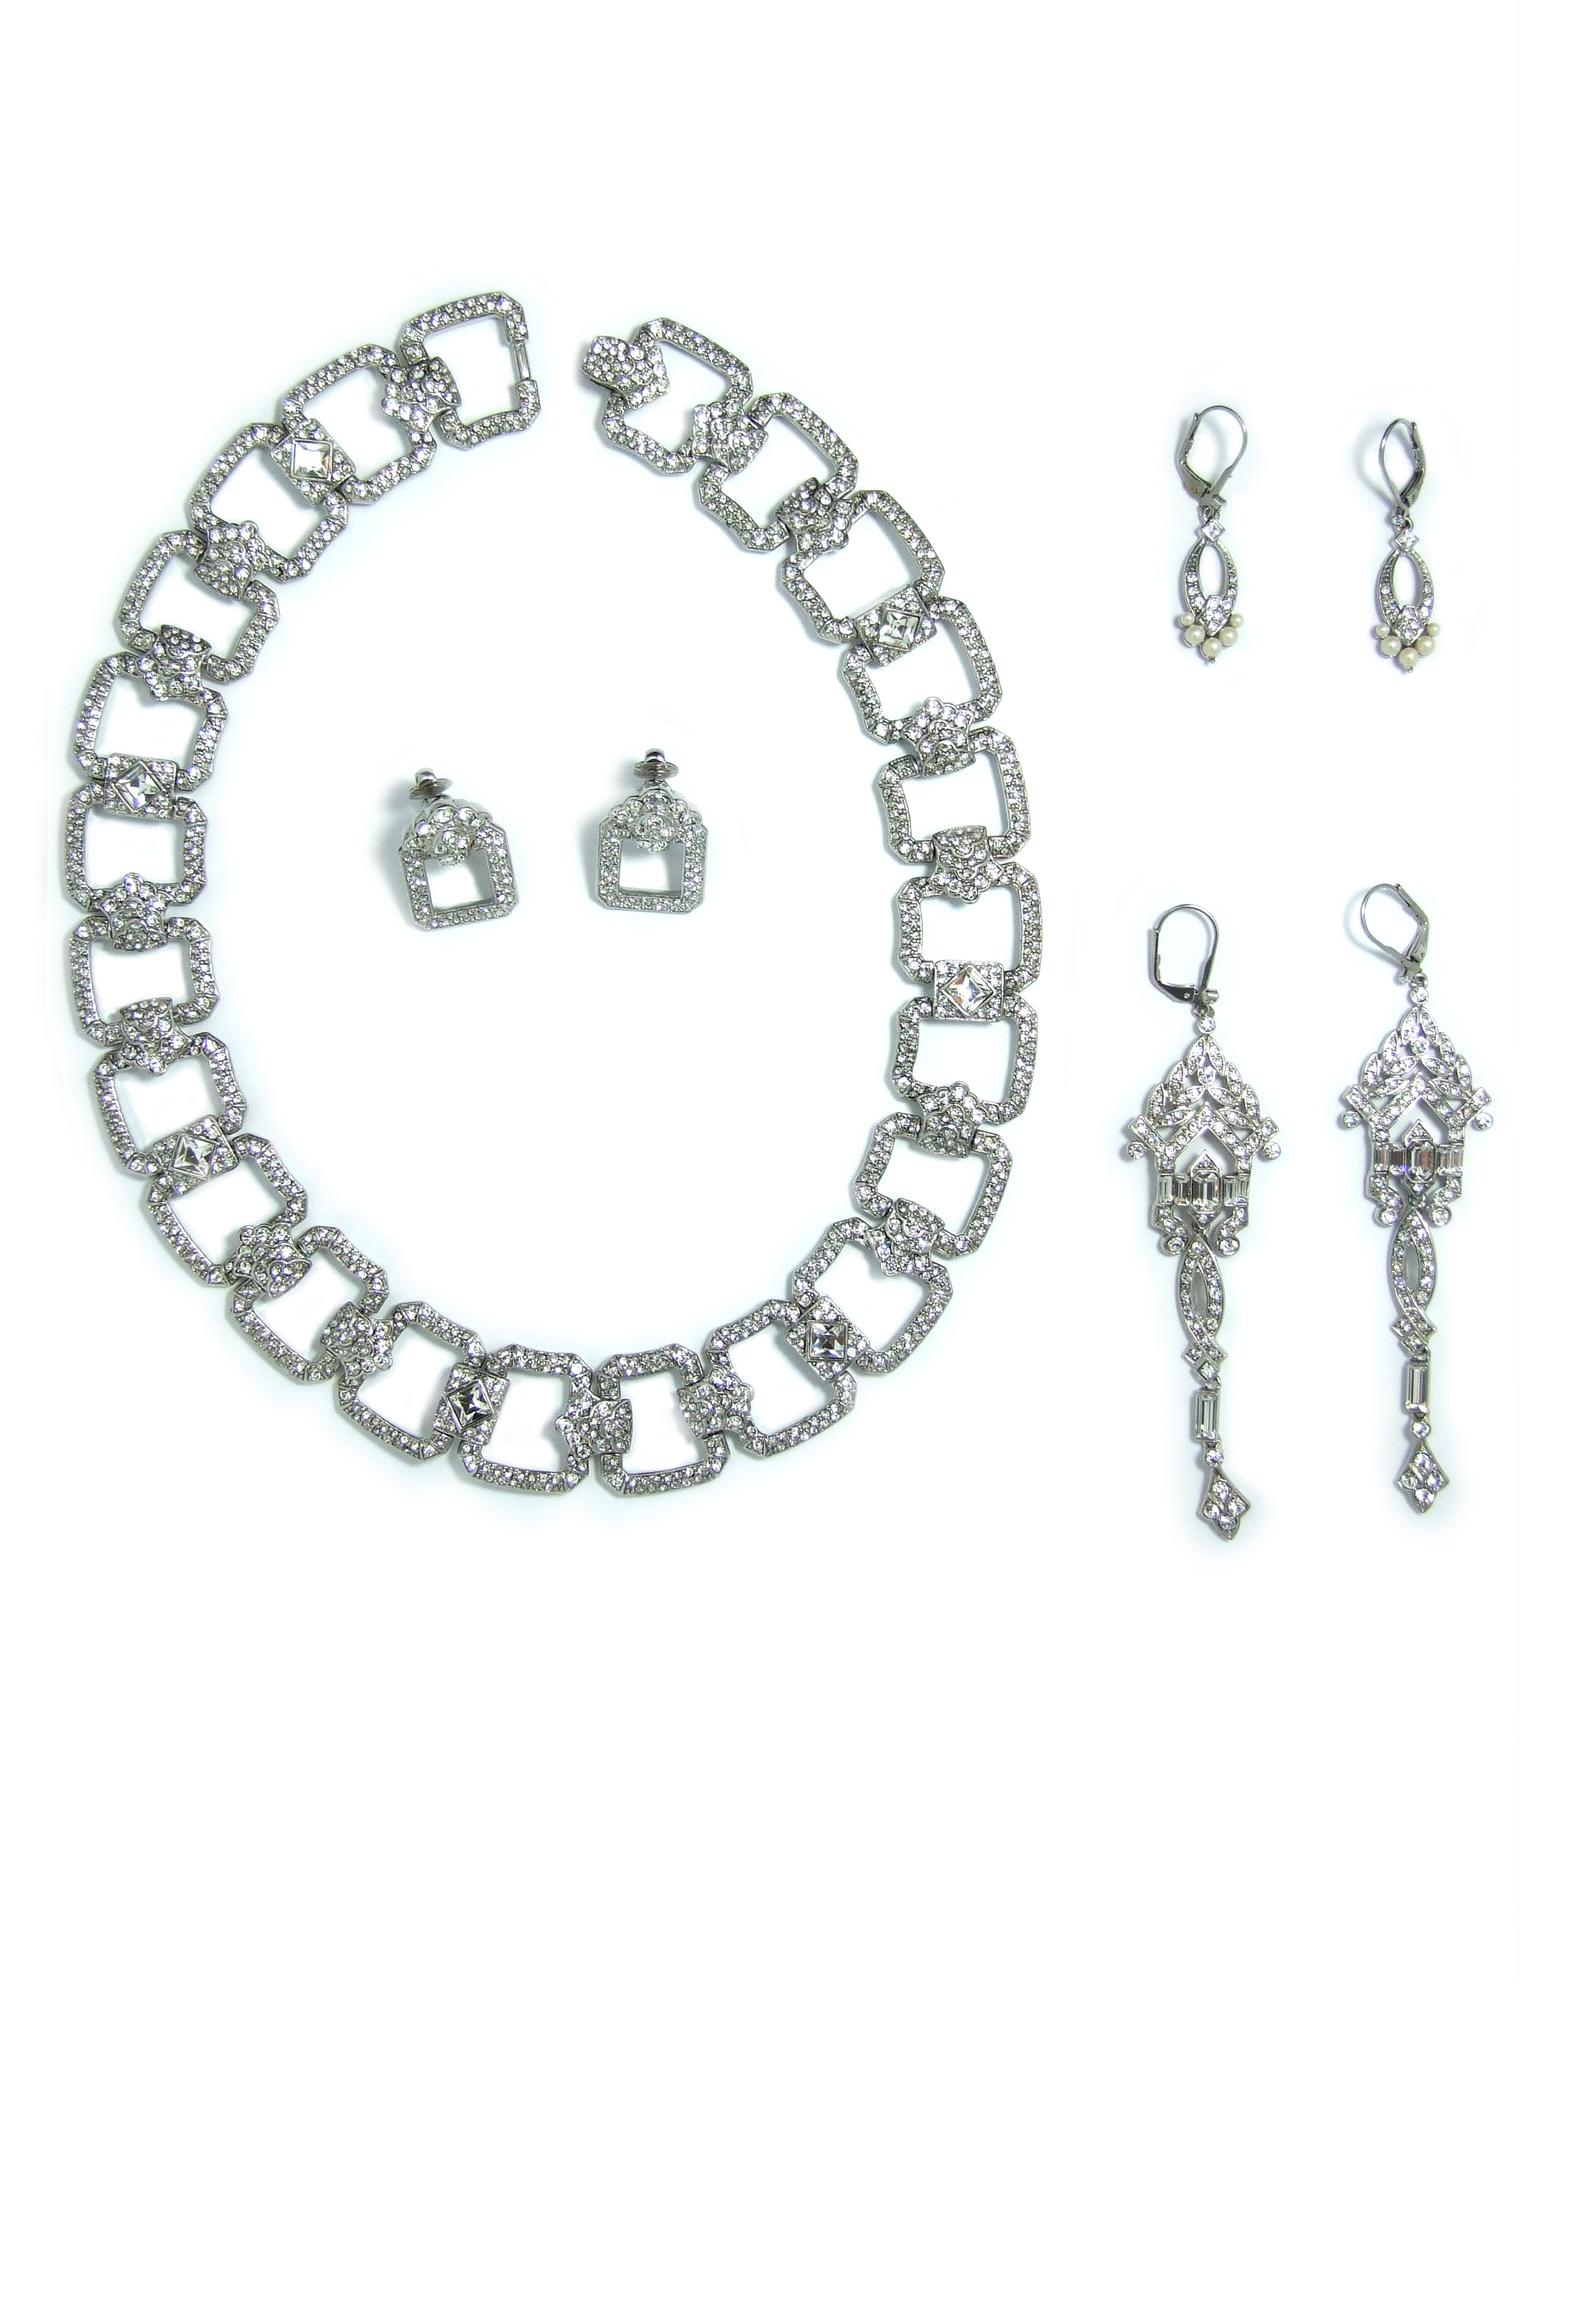 Pave link necklace & earrings